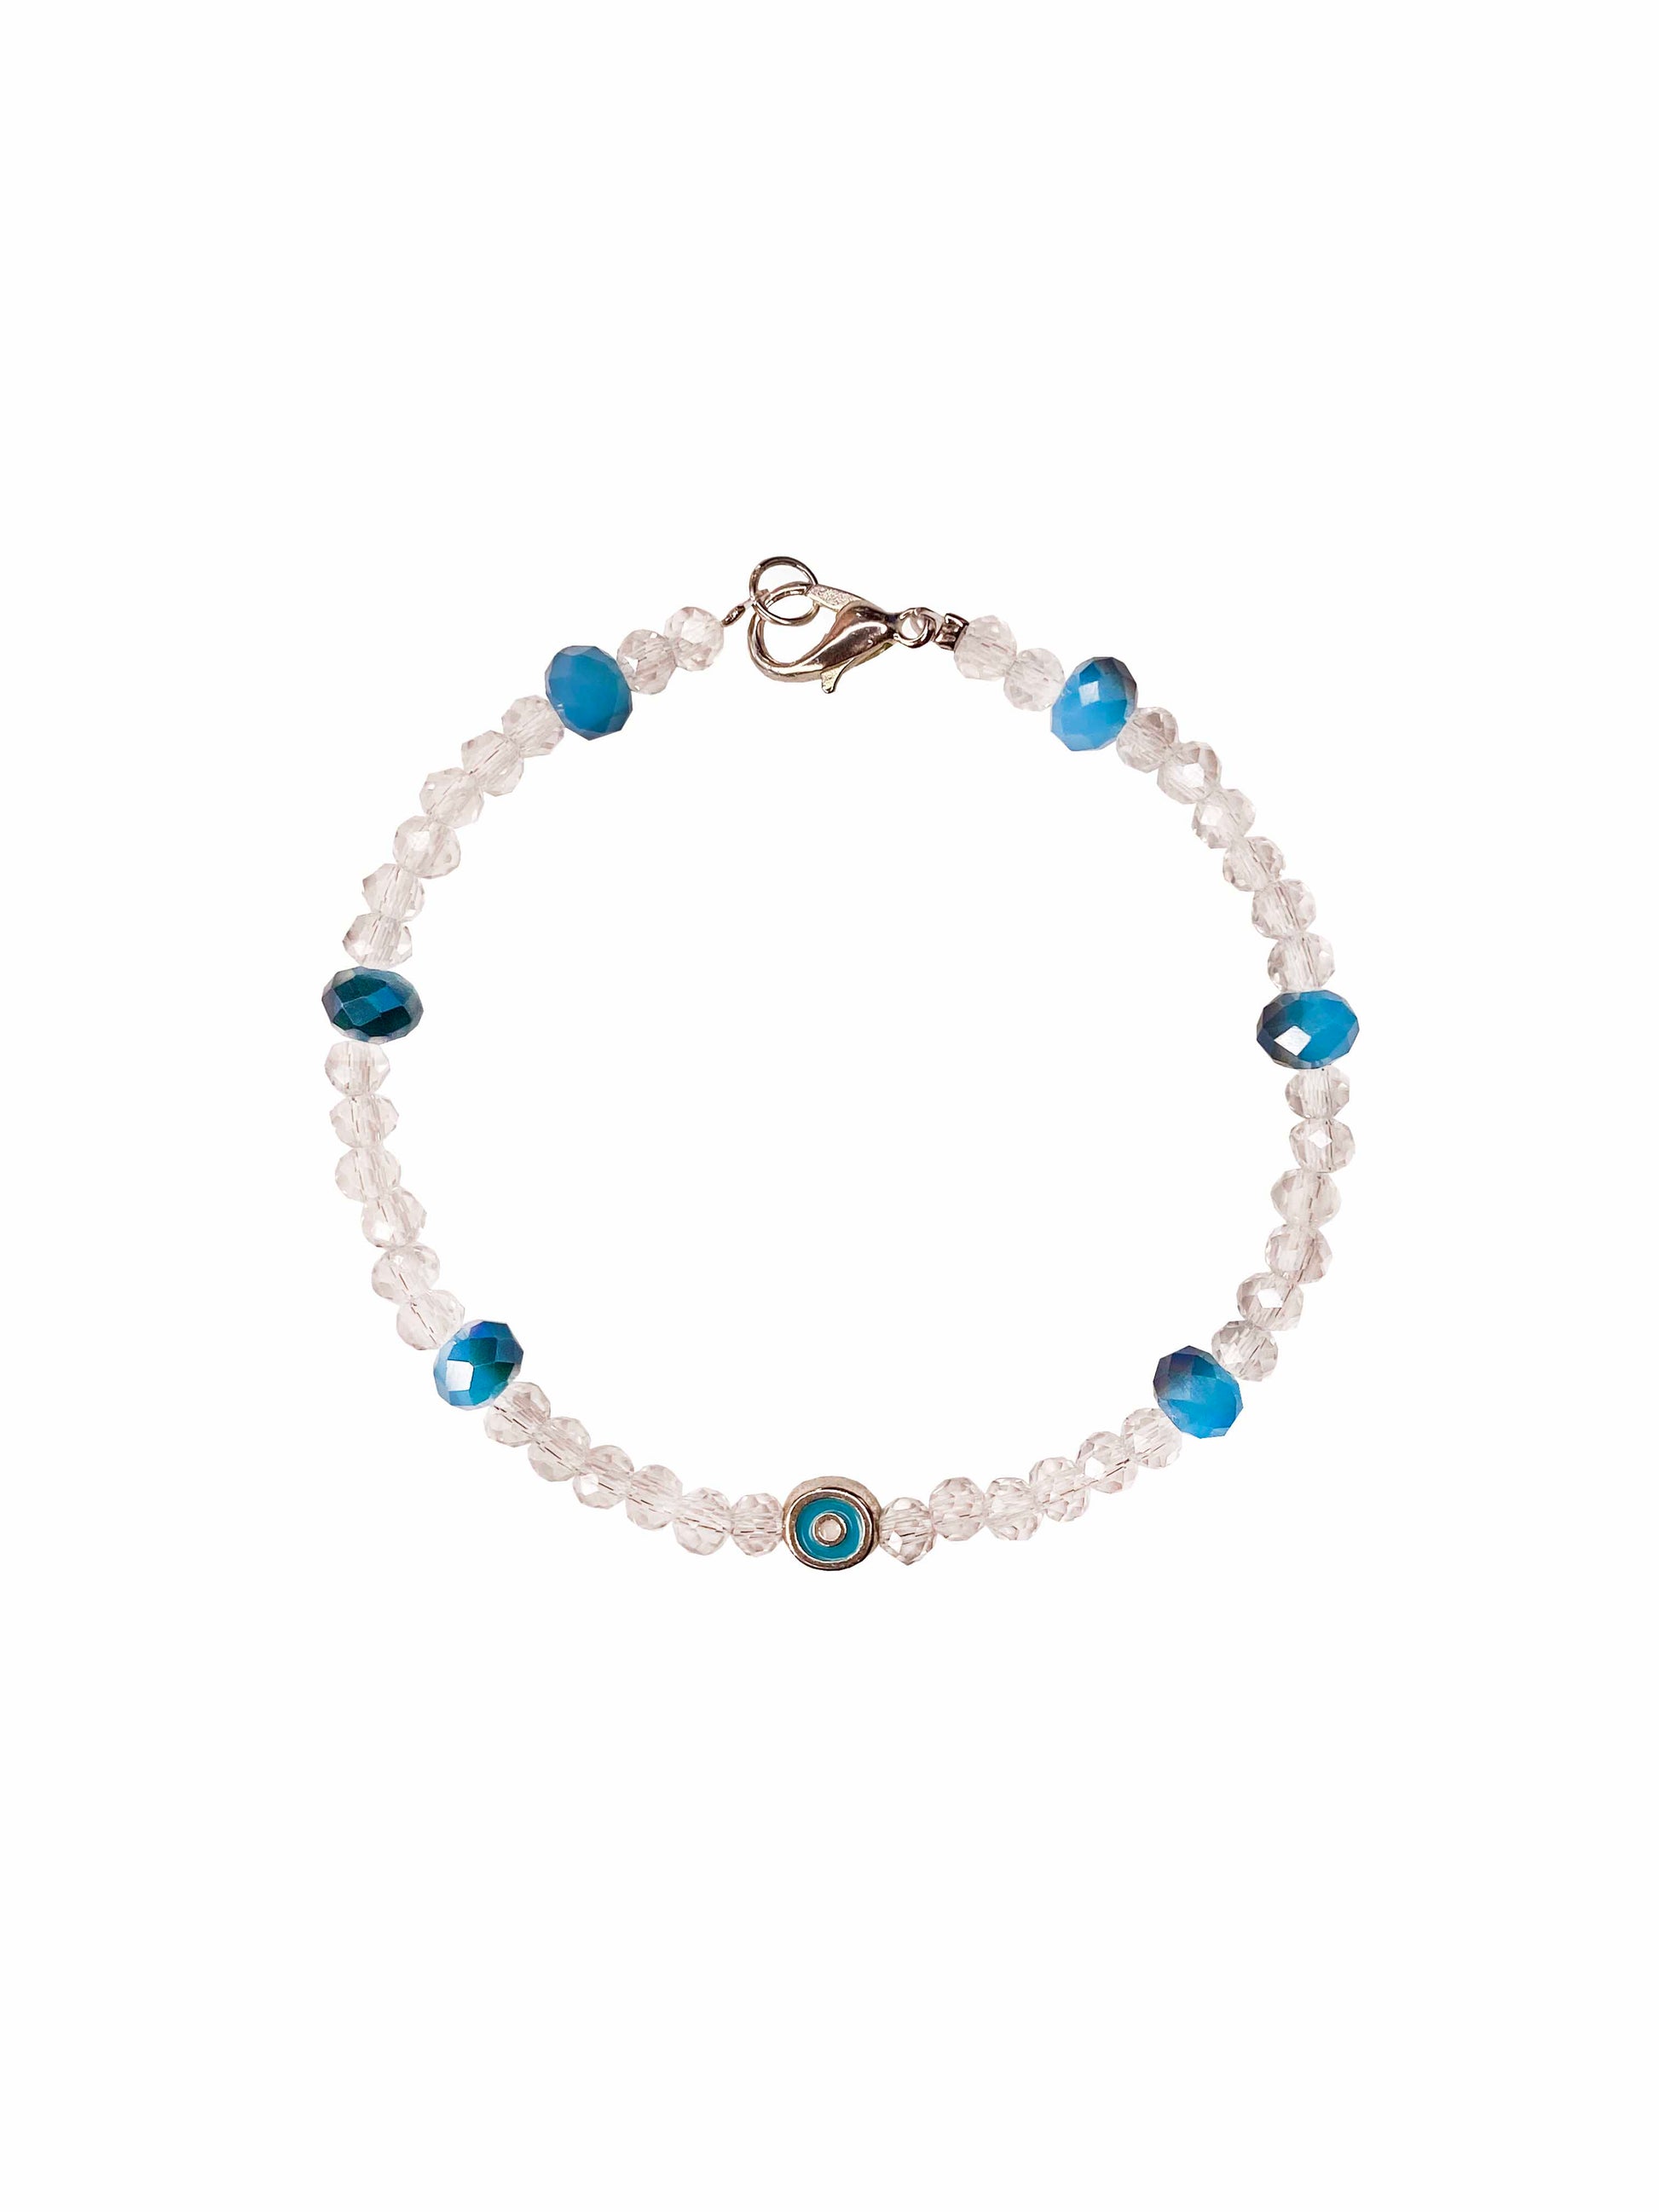 Handmade clear and blue crystal beaded bracelet with a silver backed blue evil eye charm.